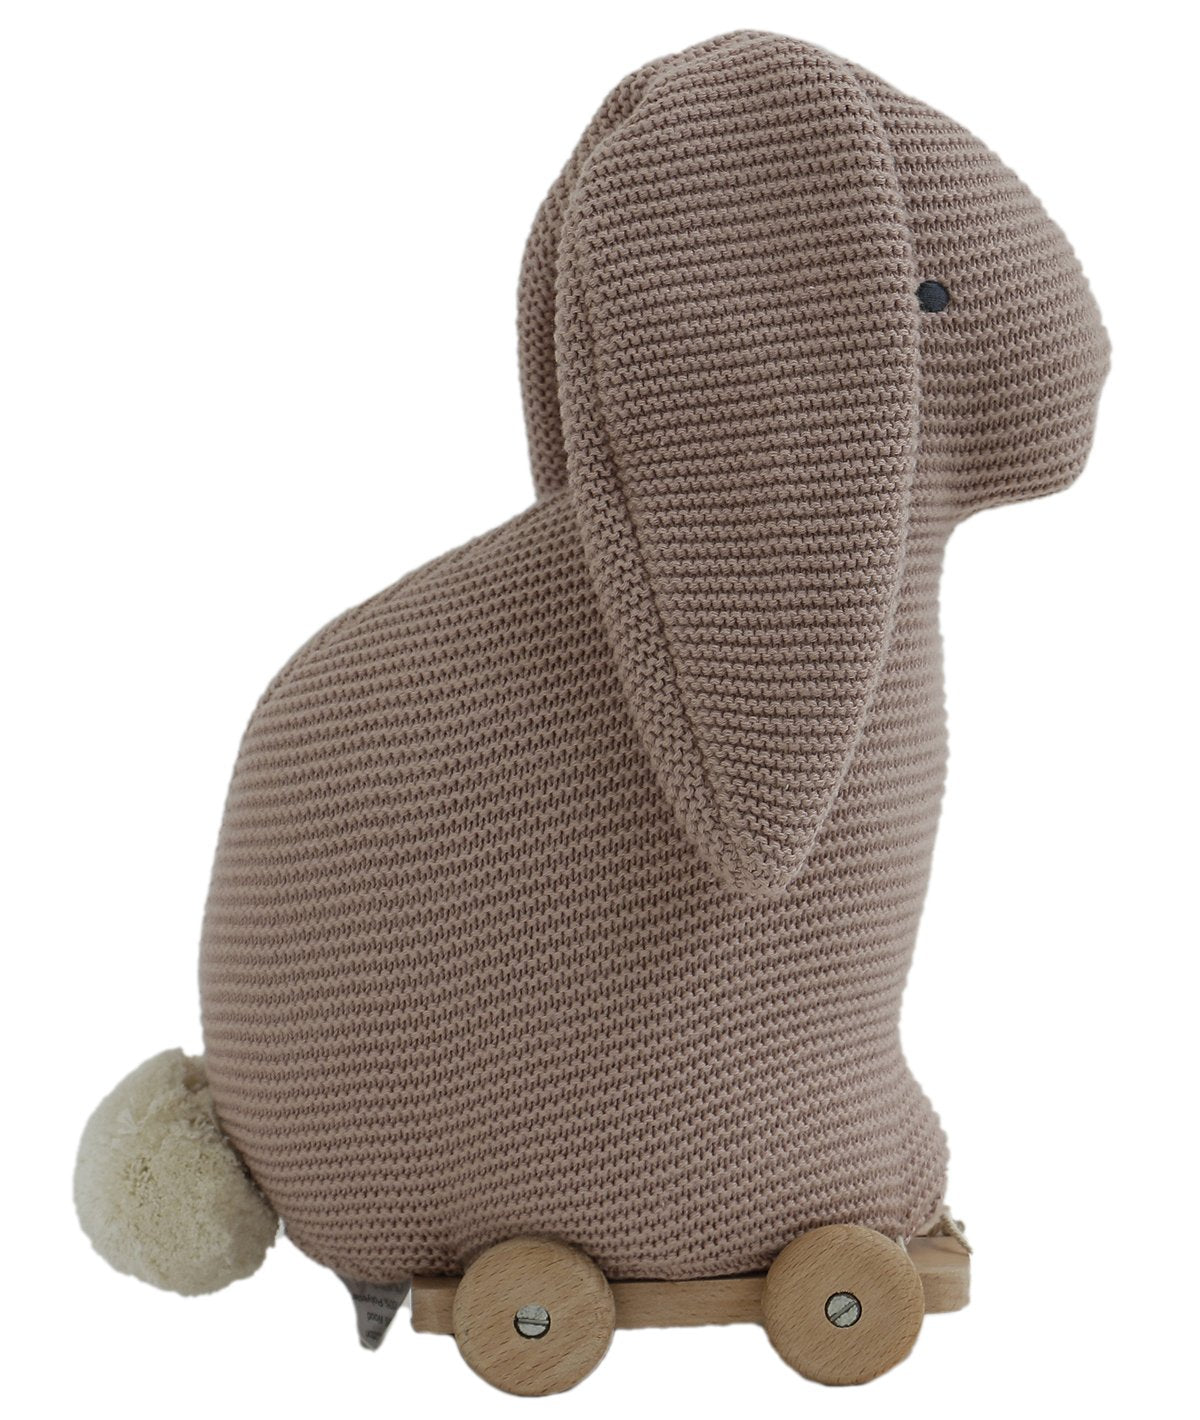 Push & Pull Bunny - Pale Pink 100% Cotton Knitted Stuffed Soft Toy for Babies / Kids with Wooden Cart